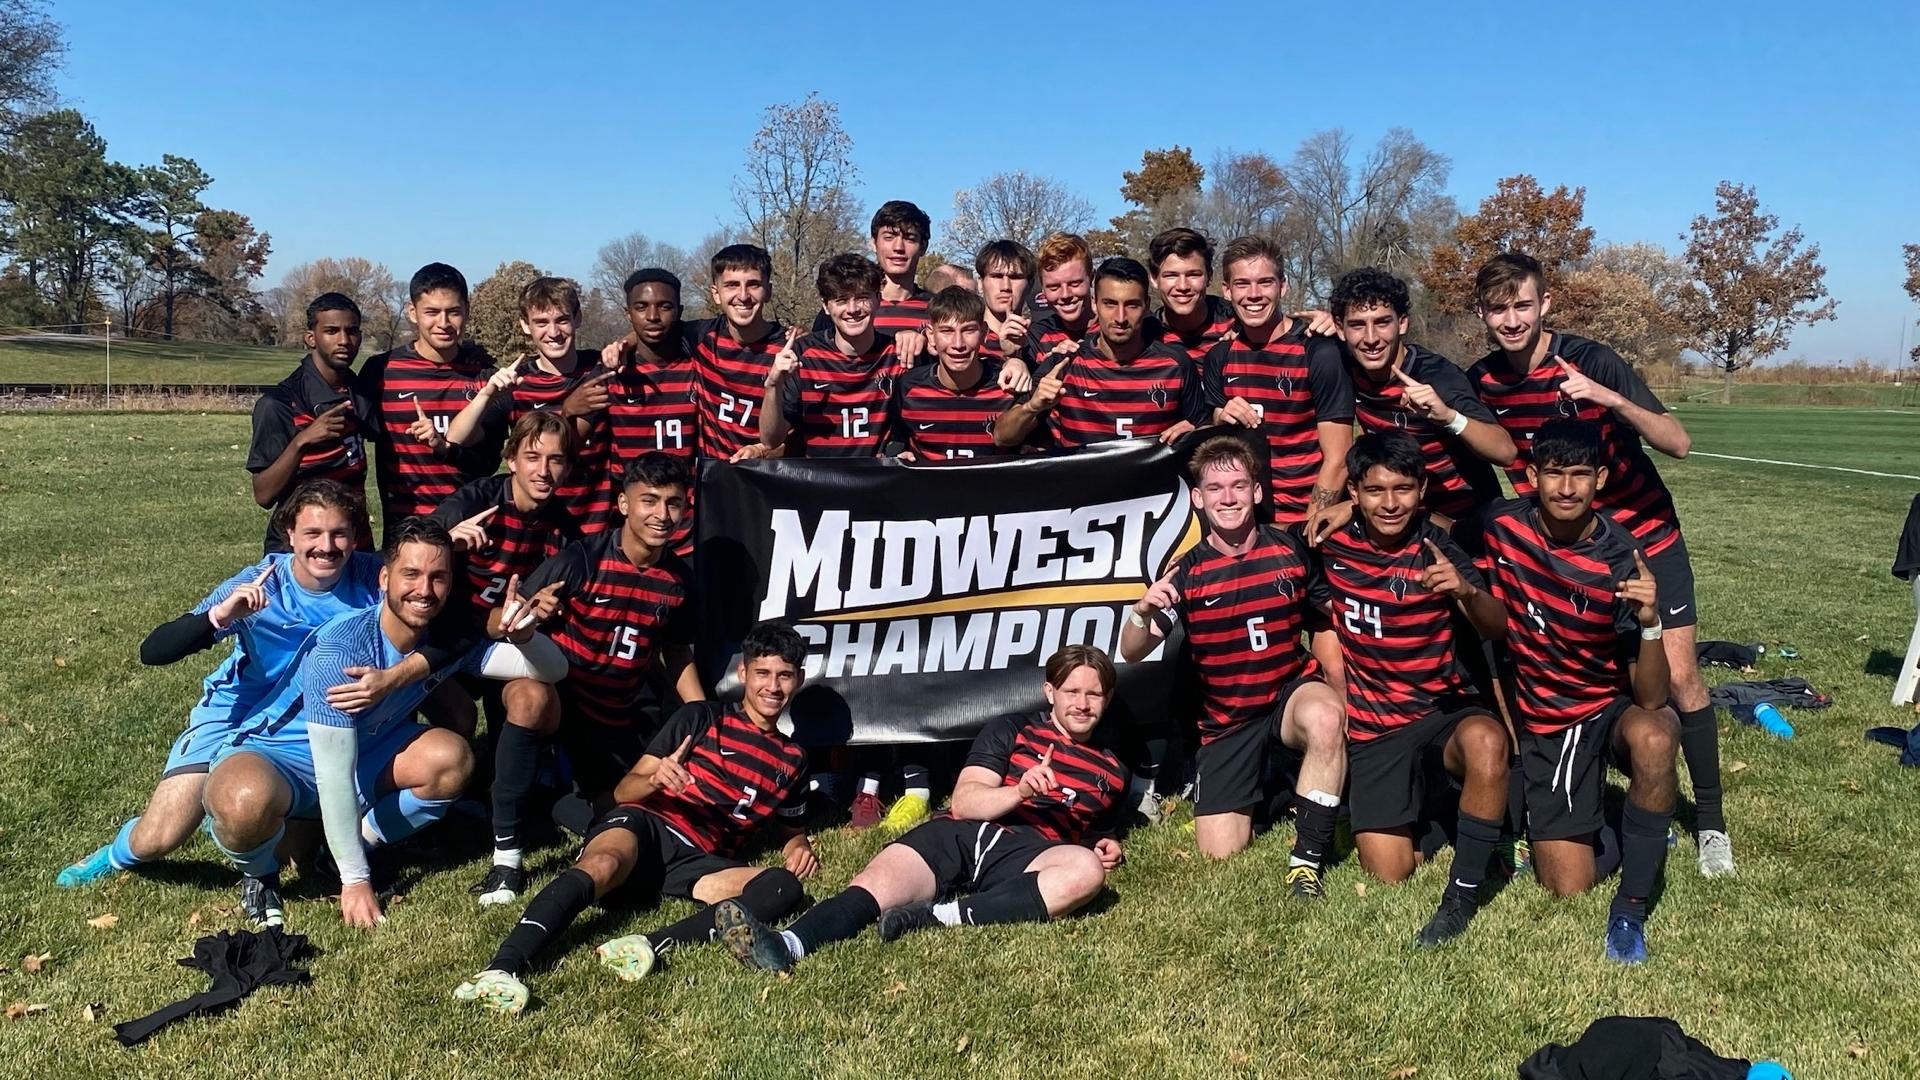 Foresters Win at Grinnell, Capture MWC Title